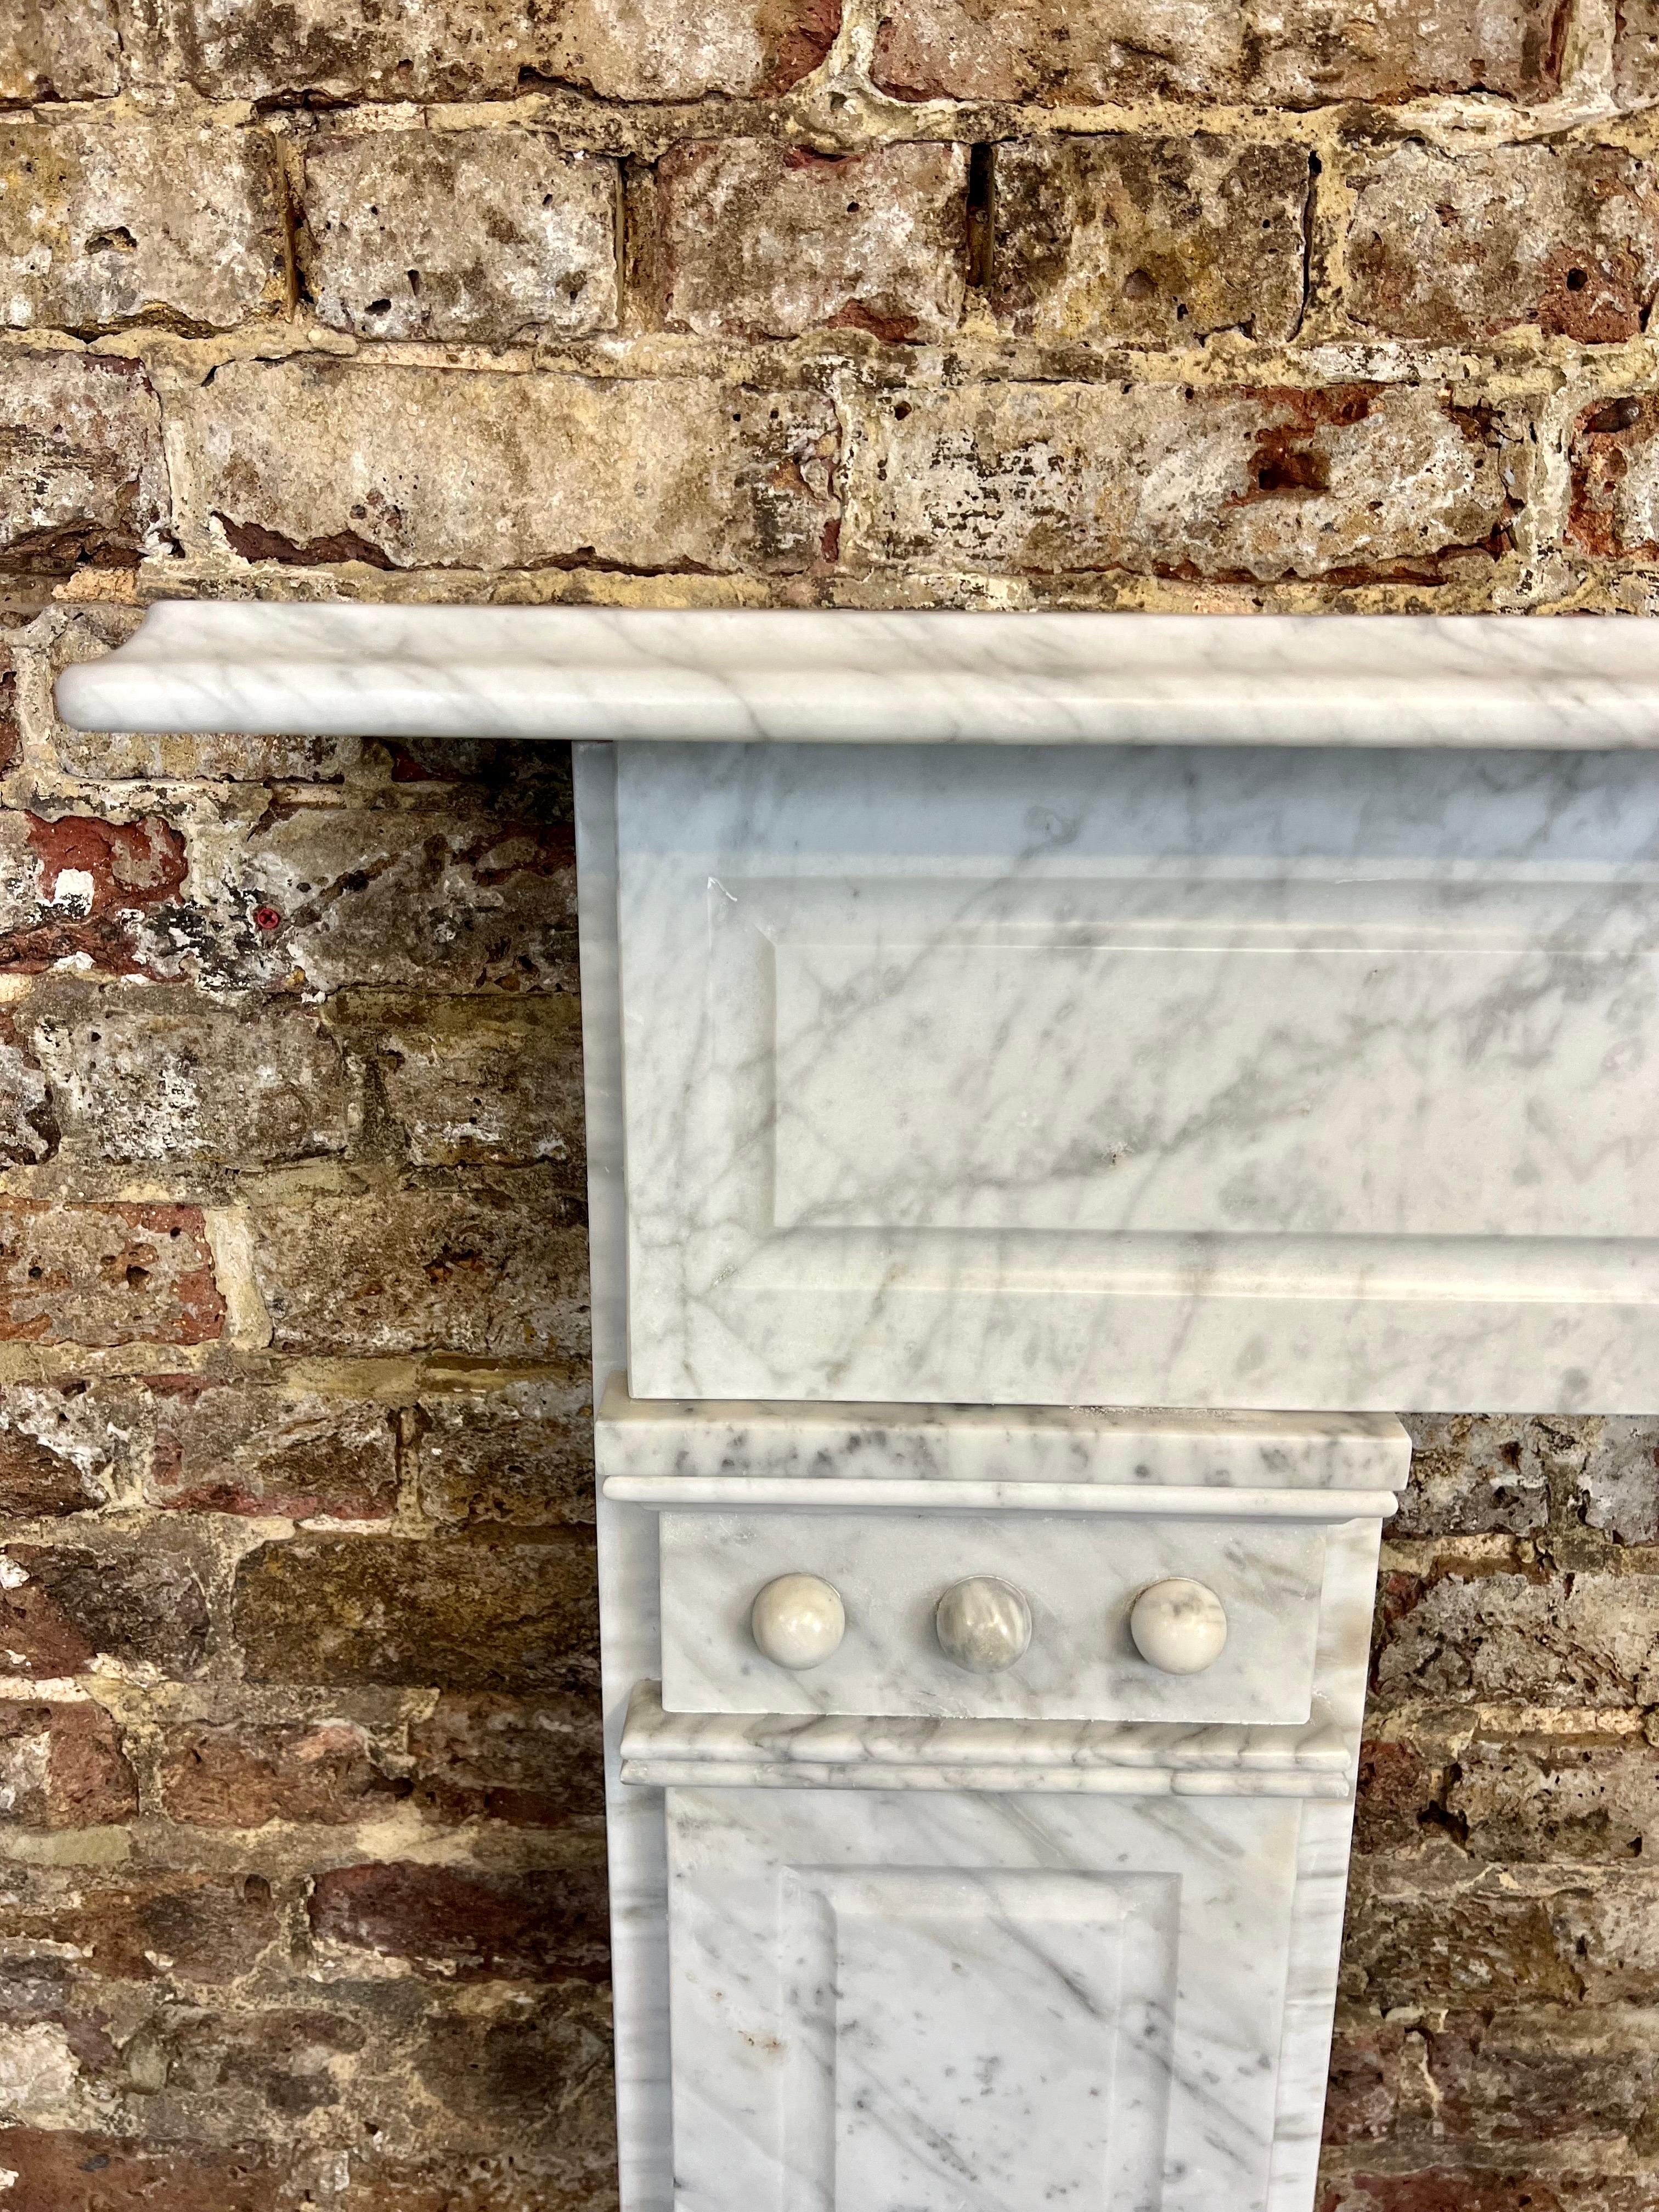 A delightful 19th century Victorian white Carrara honed marble fireplace mantelpiece. 
This fireplace surround has been recently salvaged and restored from a London city town house. 
This antique marble fireplace has recessed leg panels and a